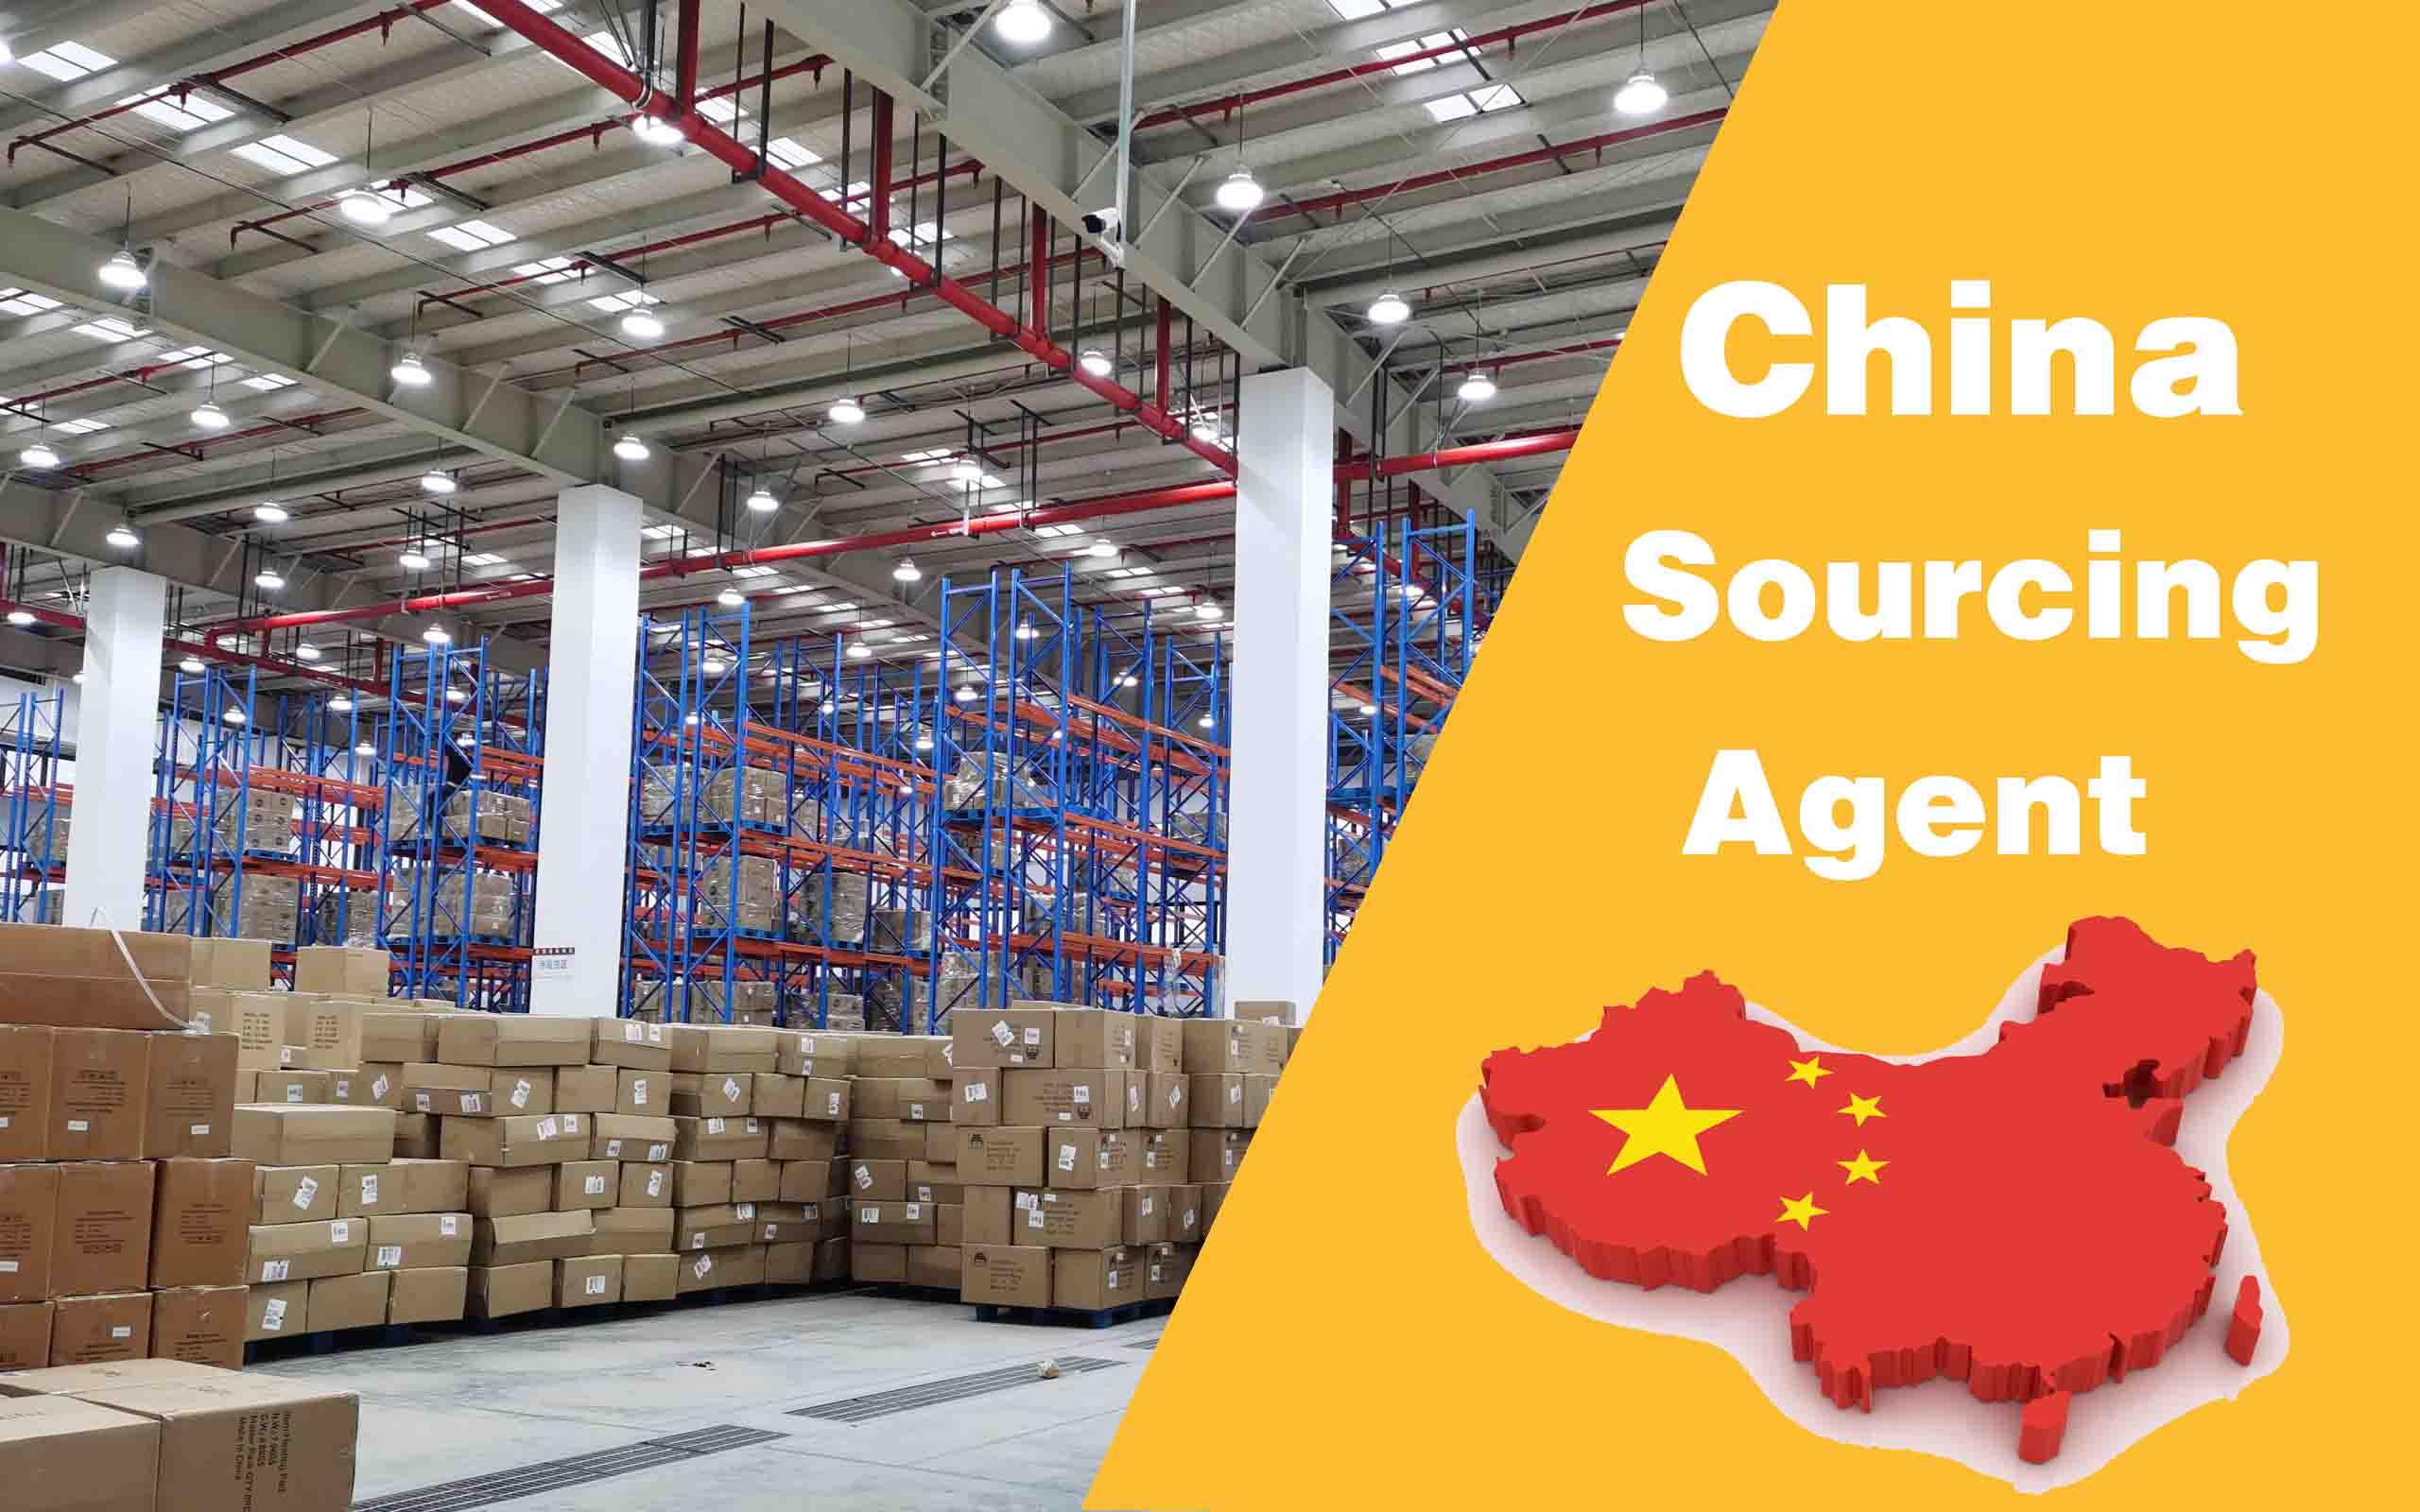 China Sourcing Agent